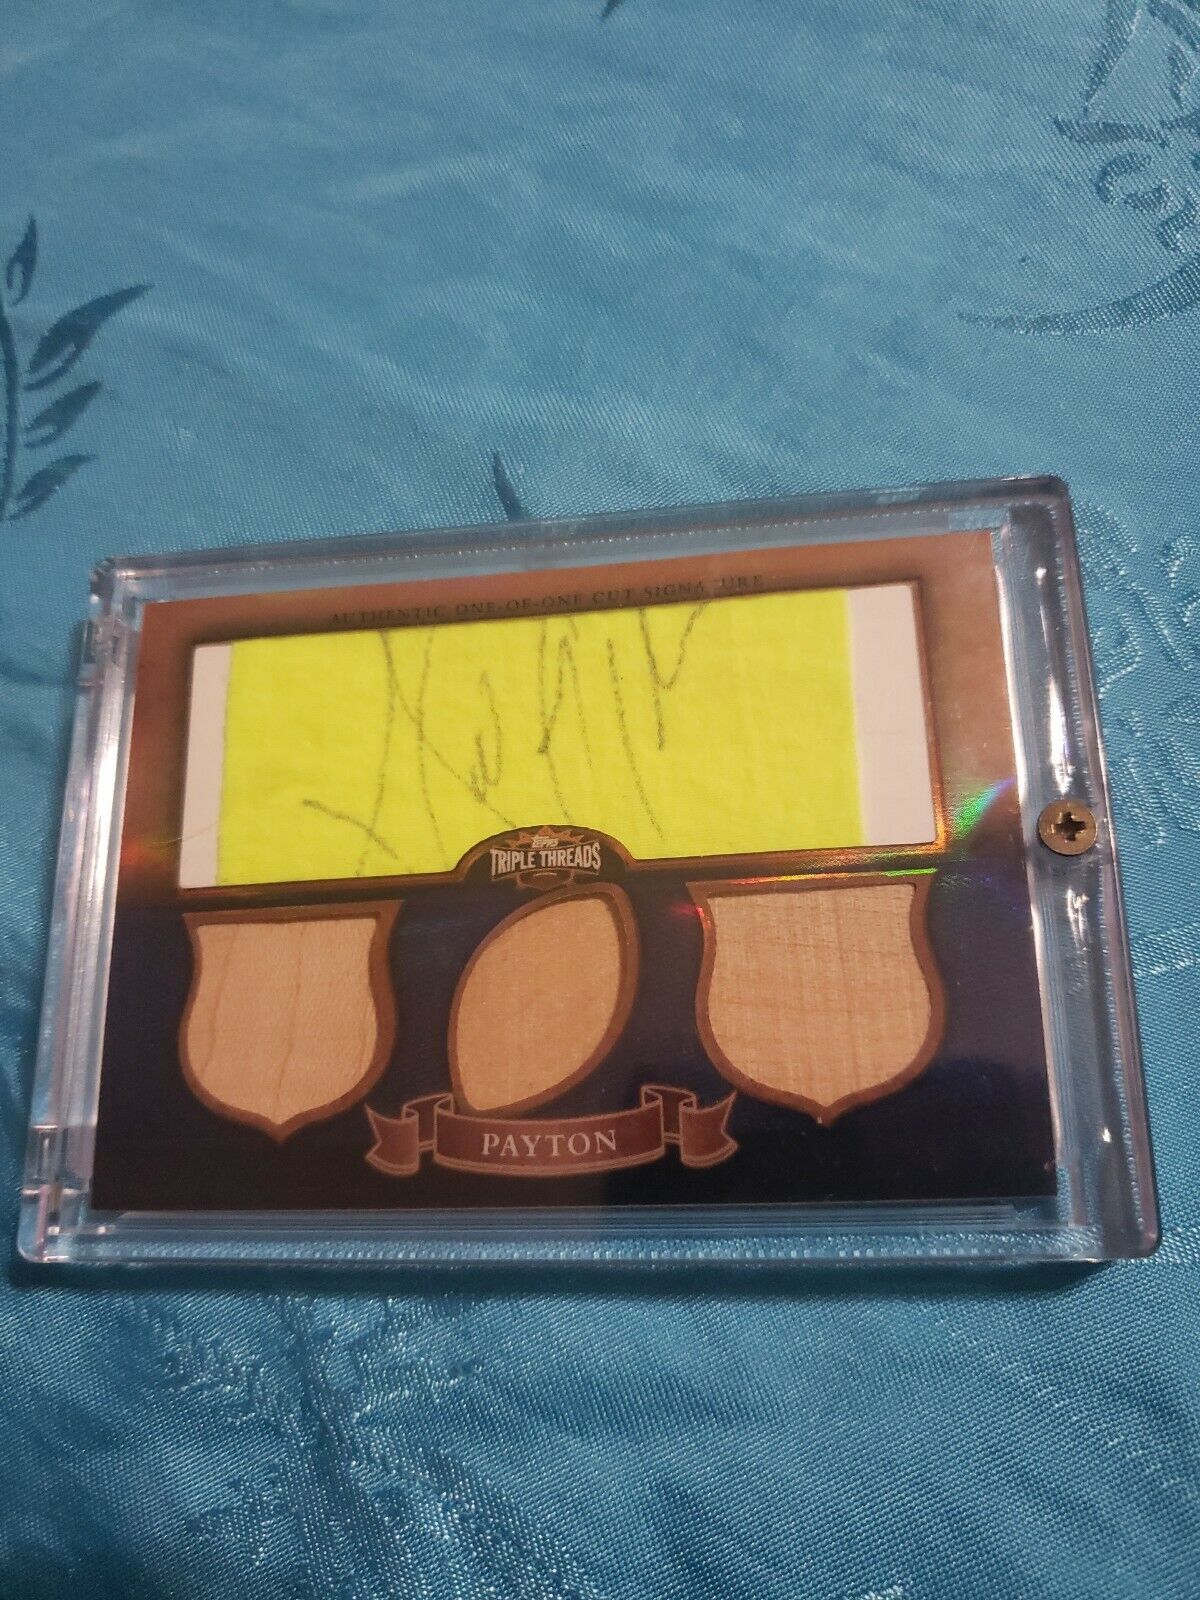 2010 topps walter payton 1/1 auto jersey and stadium seat .Holy Grail